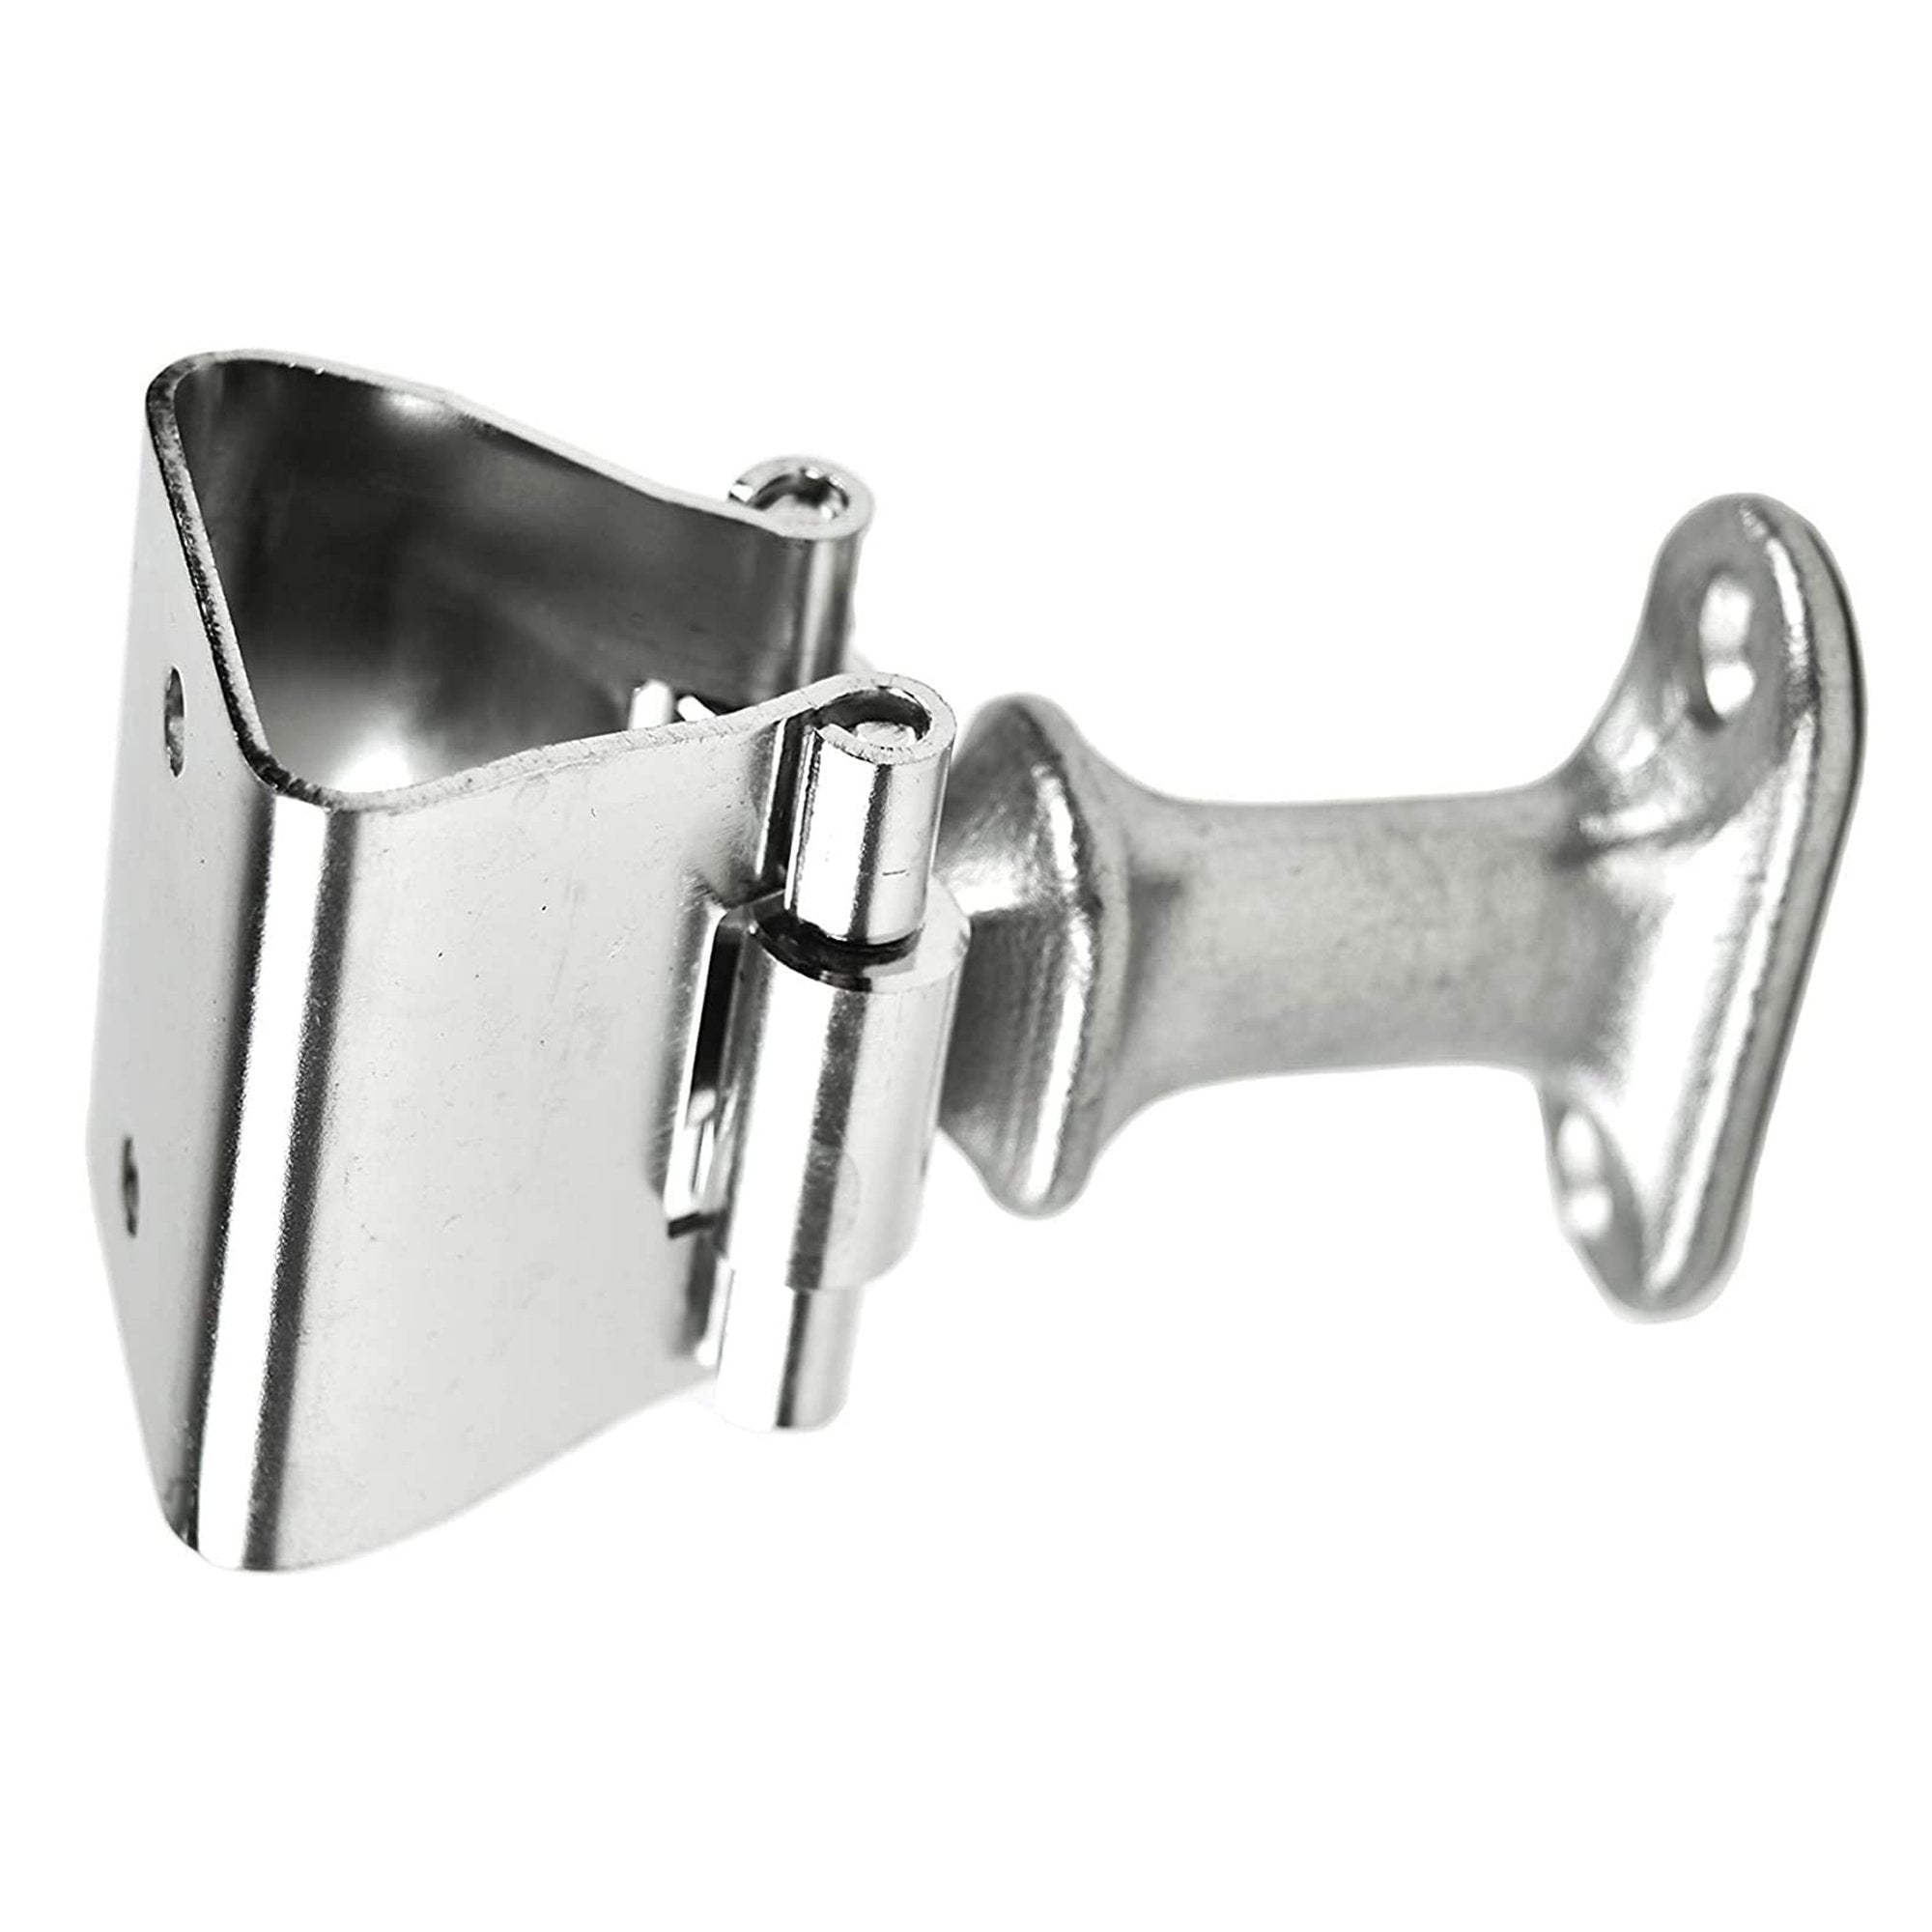 Marine City Stainless-Steel Door Stopper Catch and Holder for Boat, RV (Height: 2-3/4”) (L)